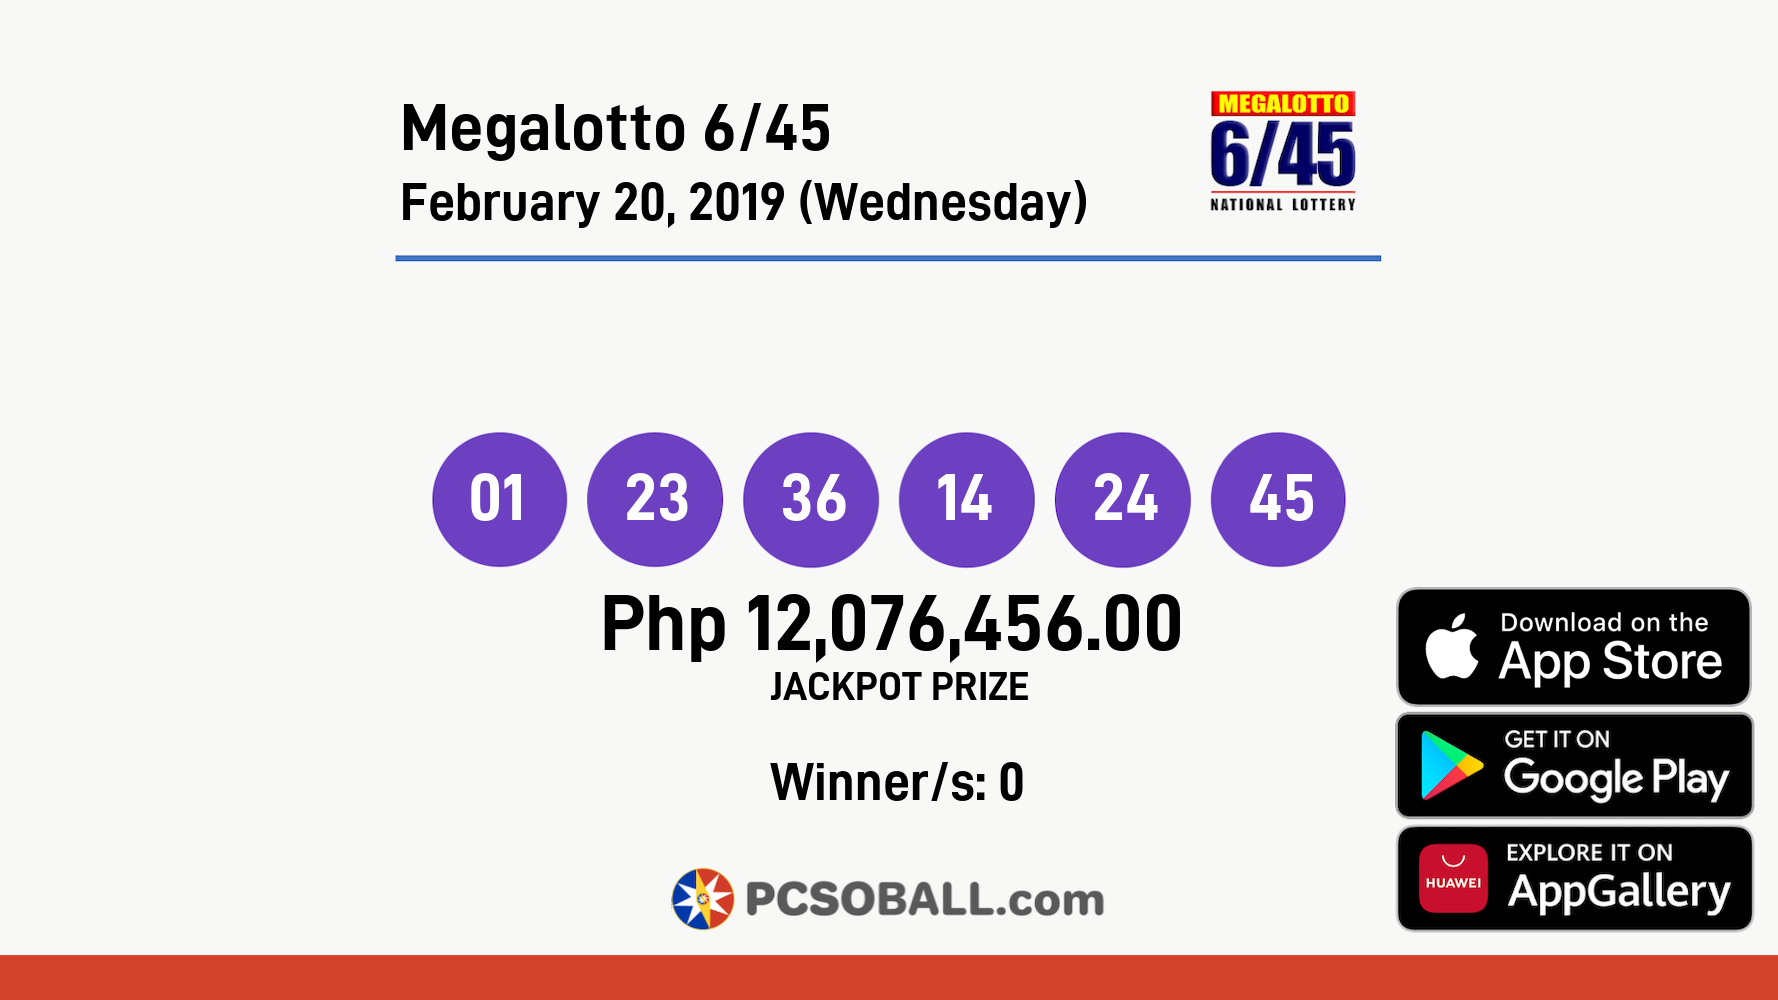 Megalotto 6/45 February 20, 2019 (Wednesday) Result